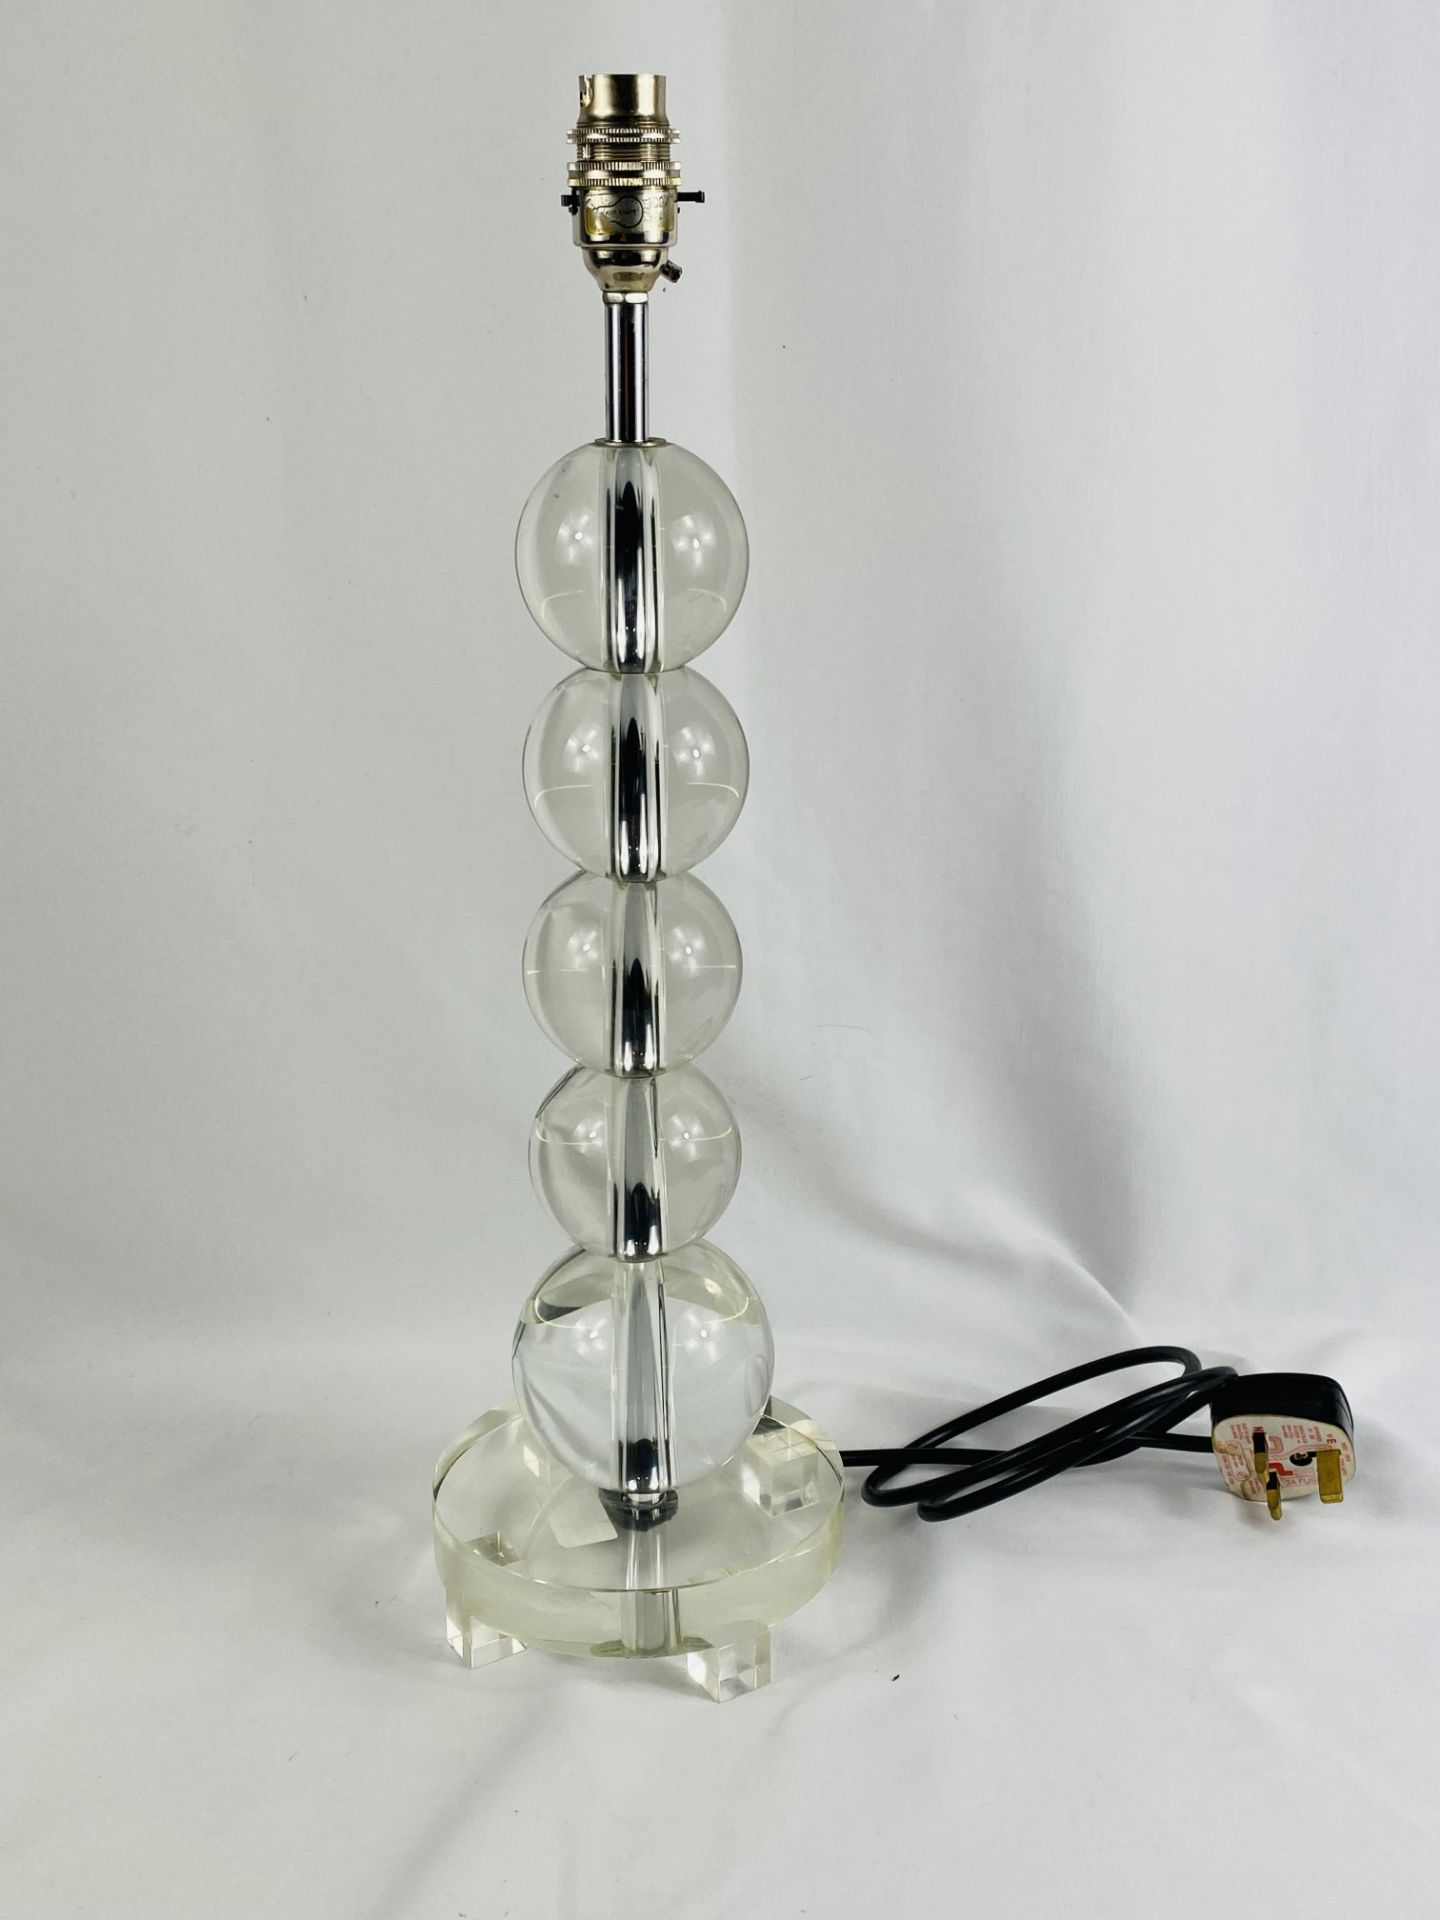 Contemporary glass and chrome table lamp - Image 3 of 4